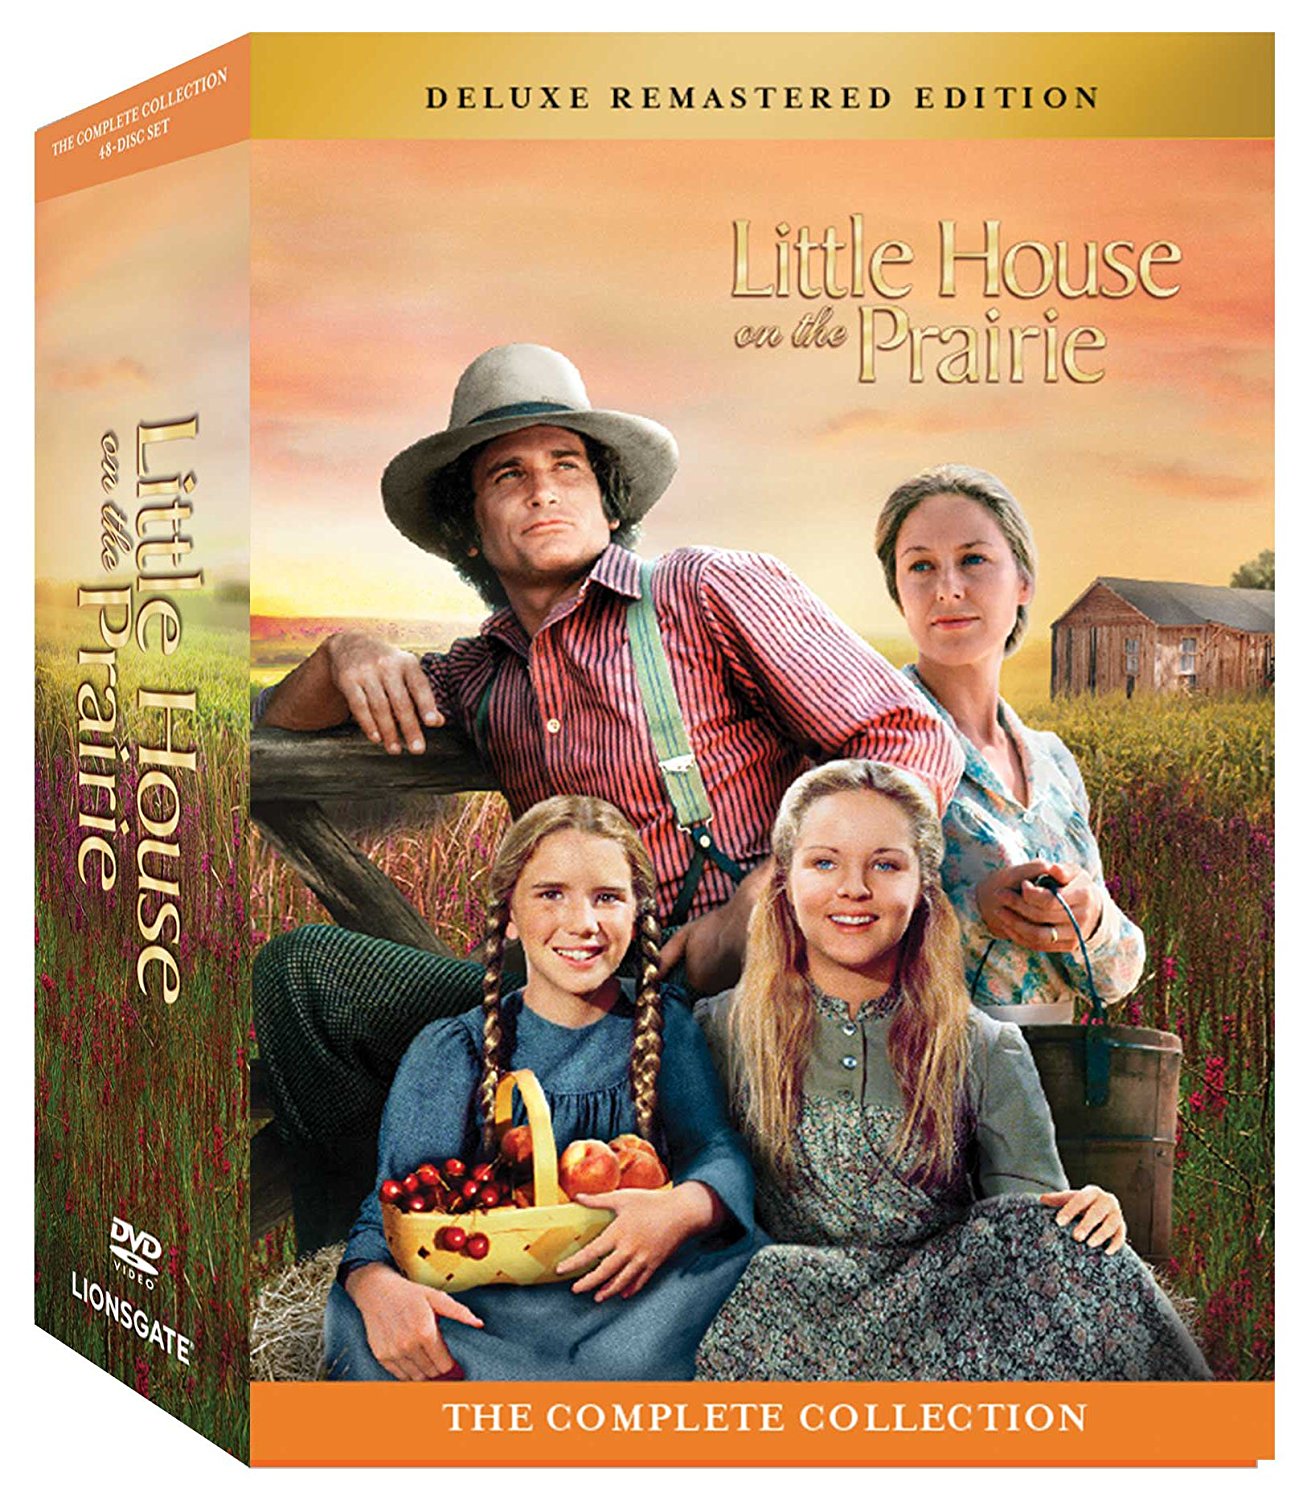 Little House on the Prairie: Complete Set (DVD) - image 2 of 2